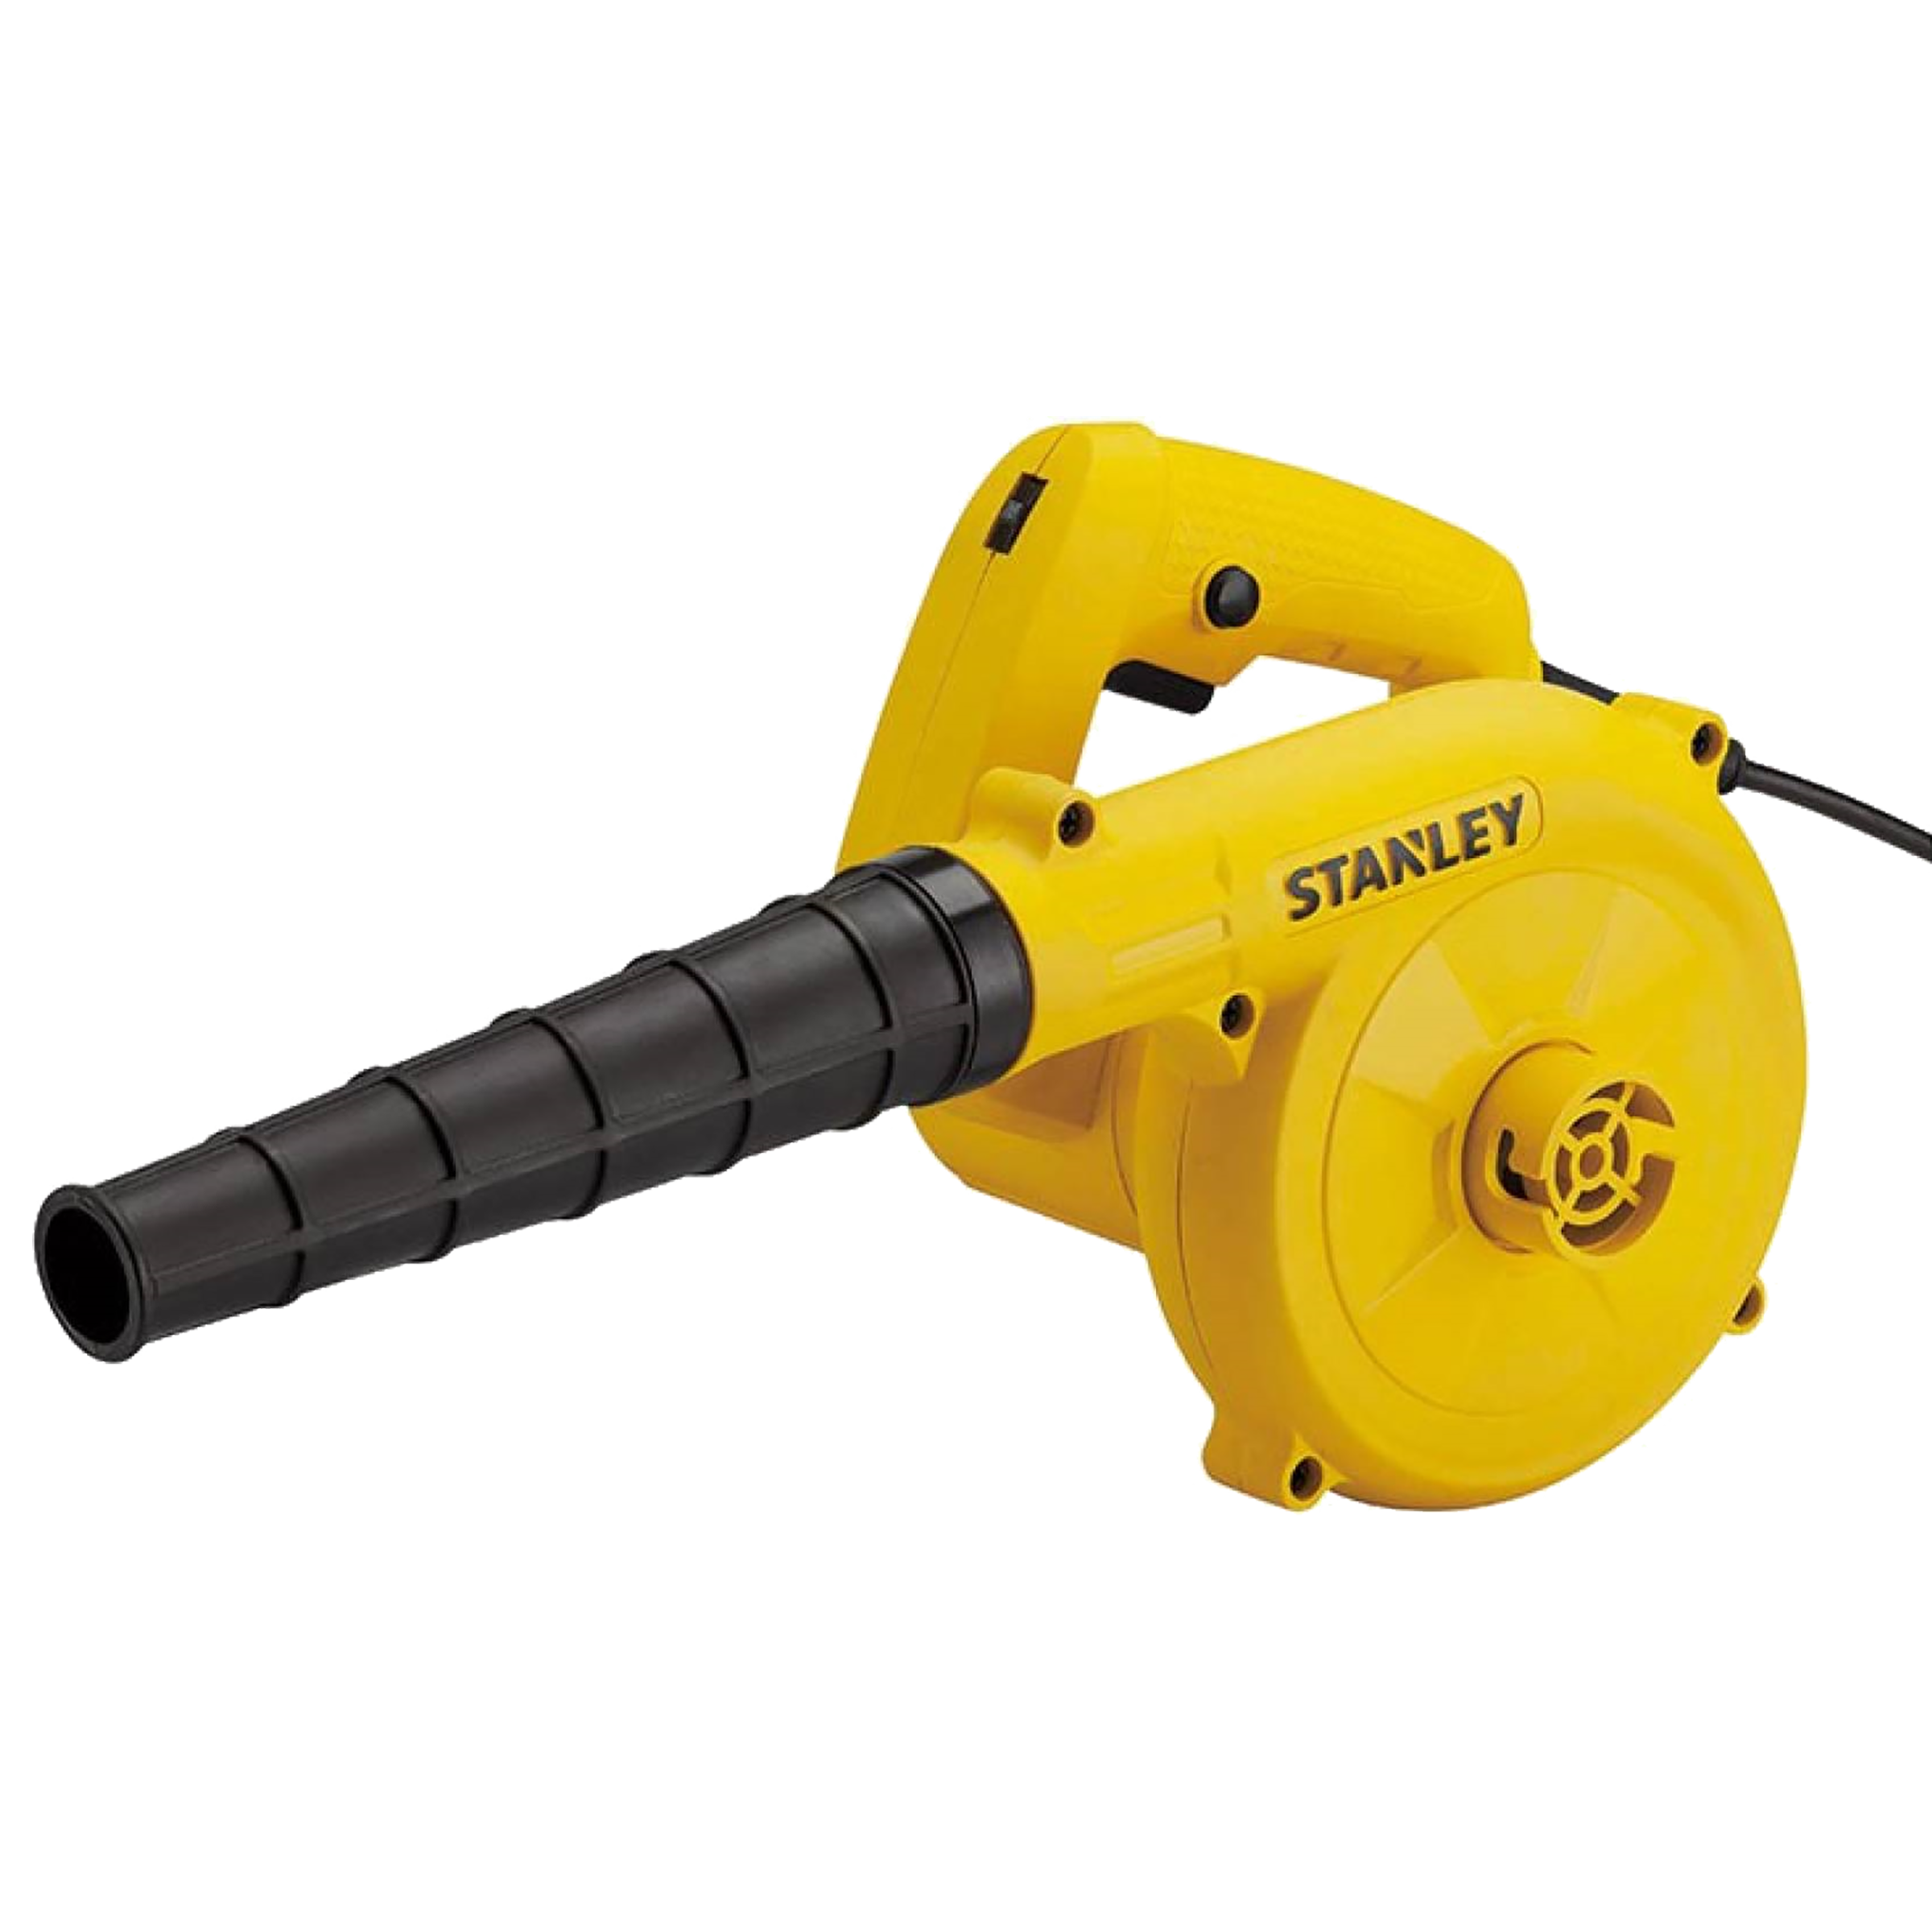 Stanley SPT500-IN 500 W Air Blower (Optimized Fan Structure, Yellow)_1